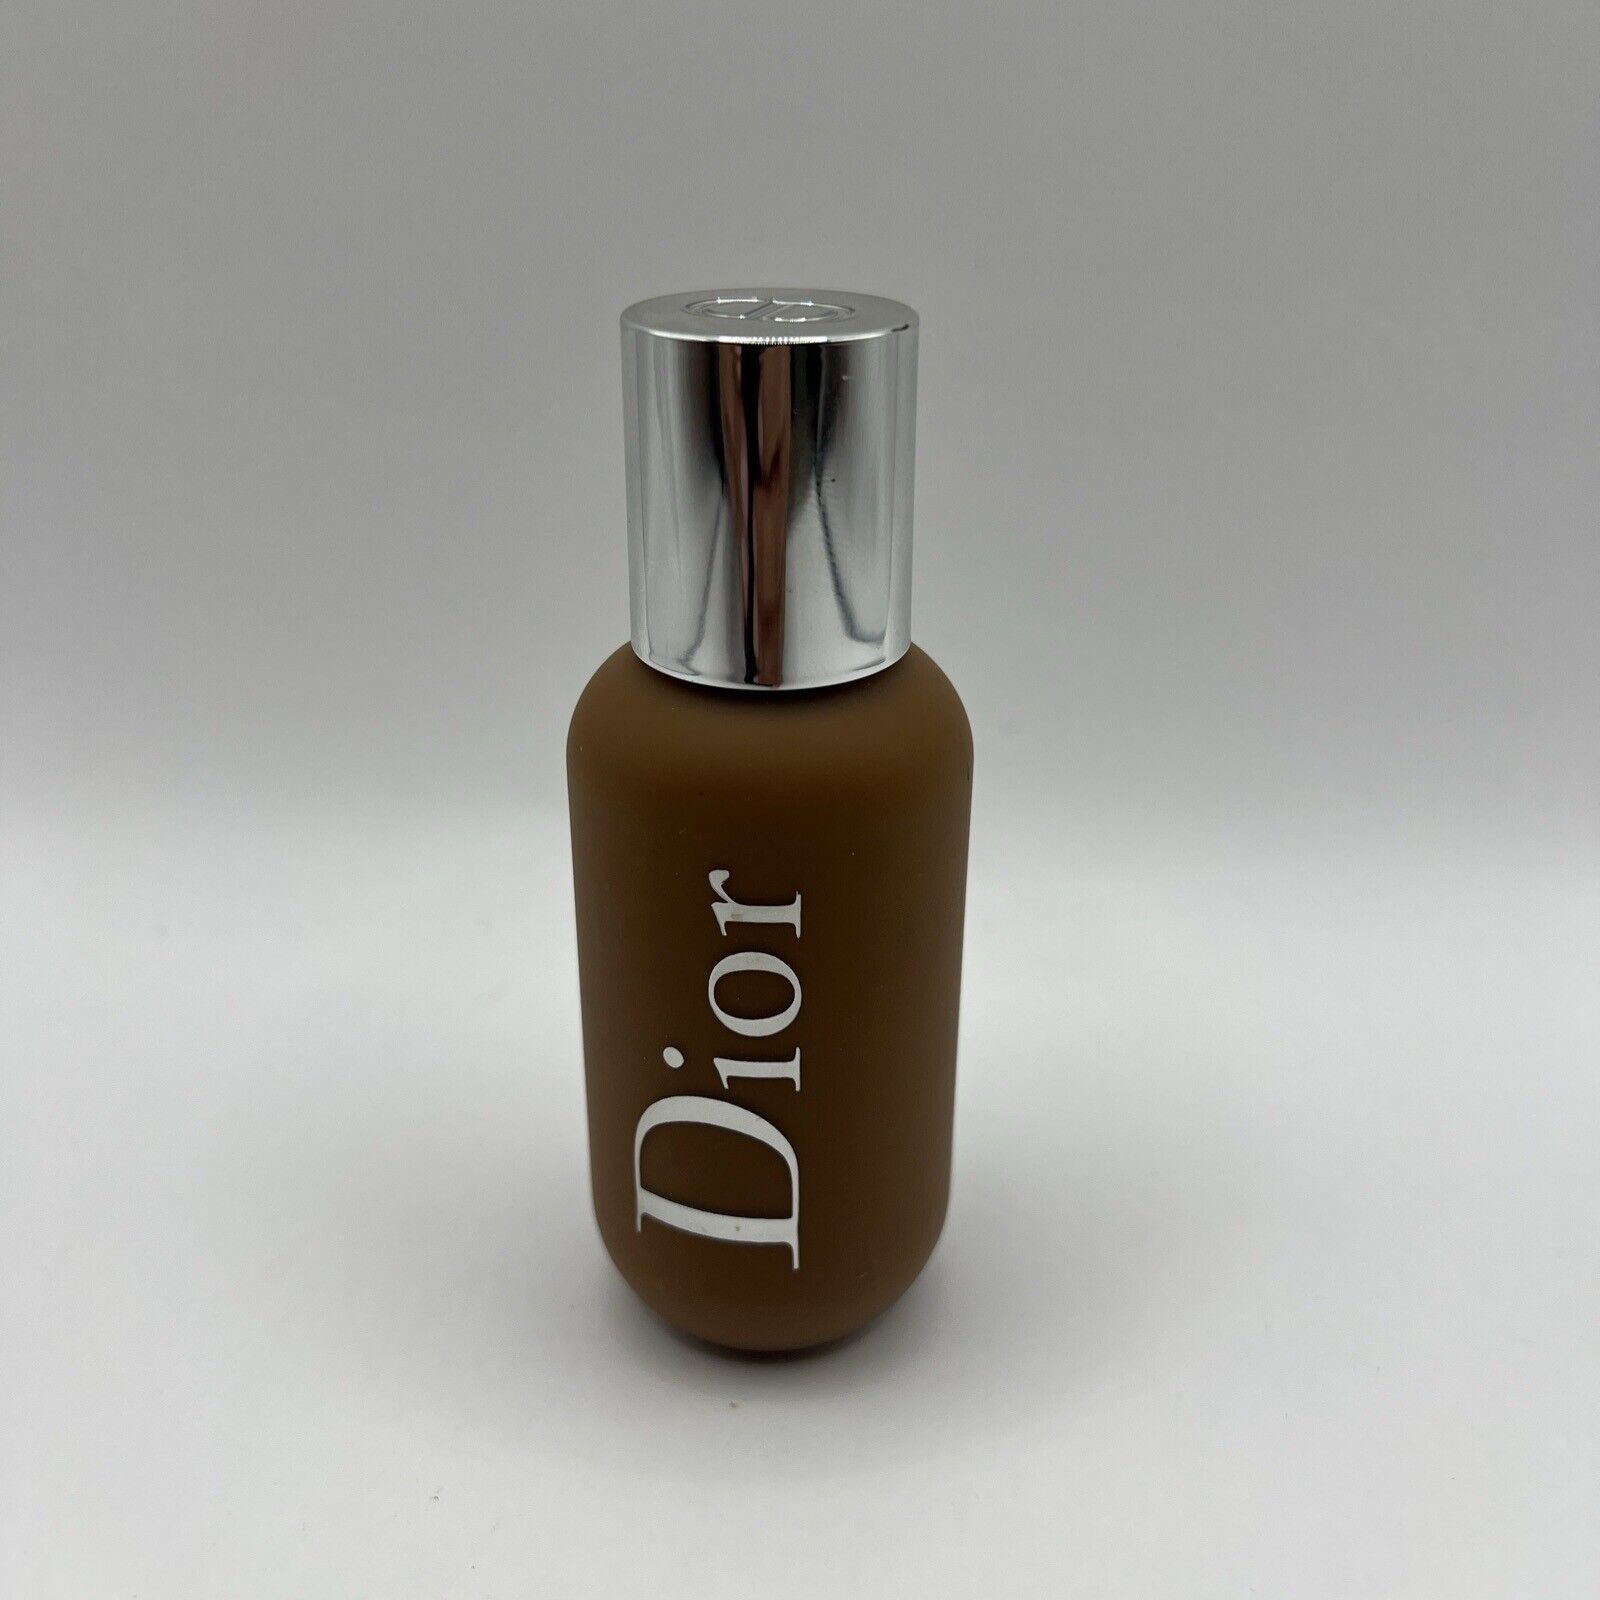 Dior Backstage Face & Body Foundation - 6 W - 1.6 oz Authentic - $29.69